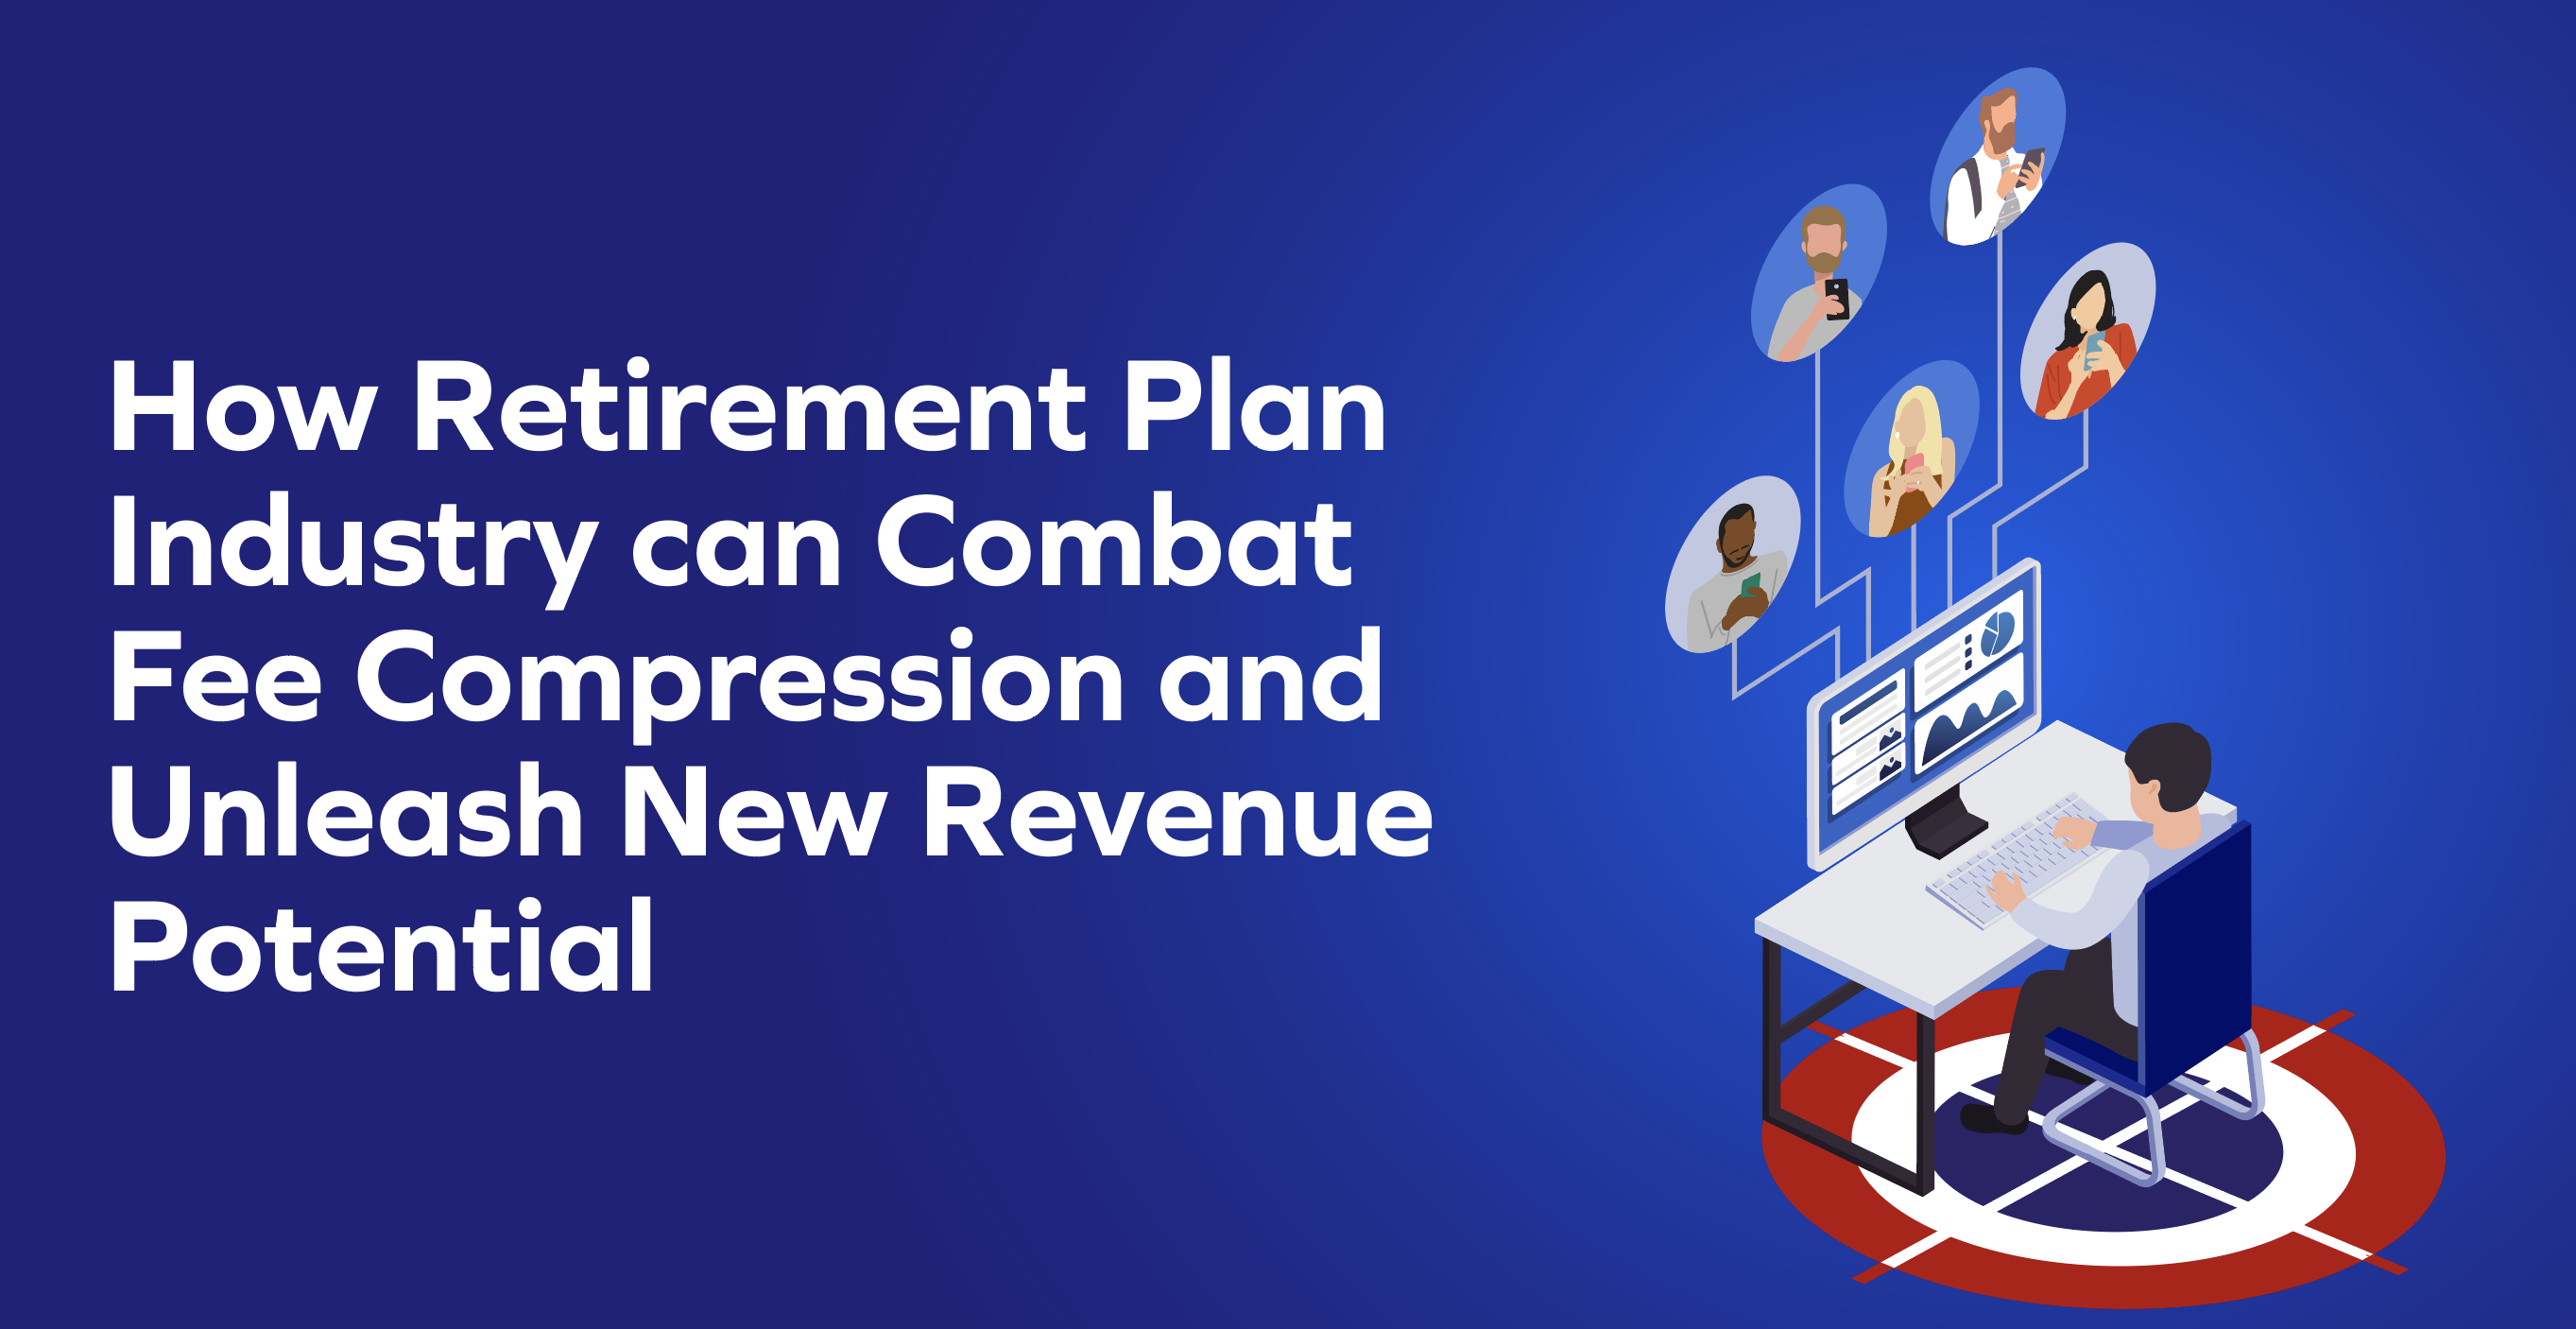 How Retirement Plan Industry can Combat Fee Compression and Unleash New Revenue Potential?